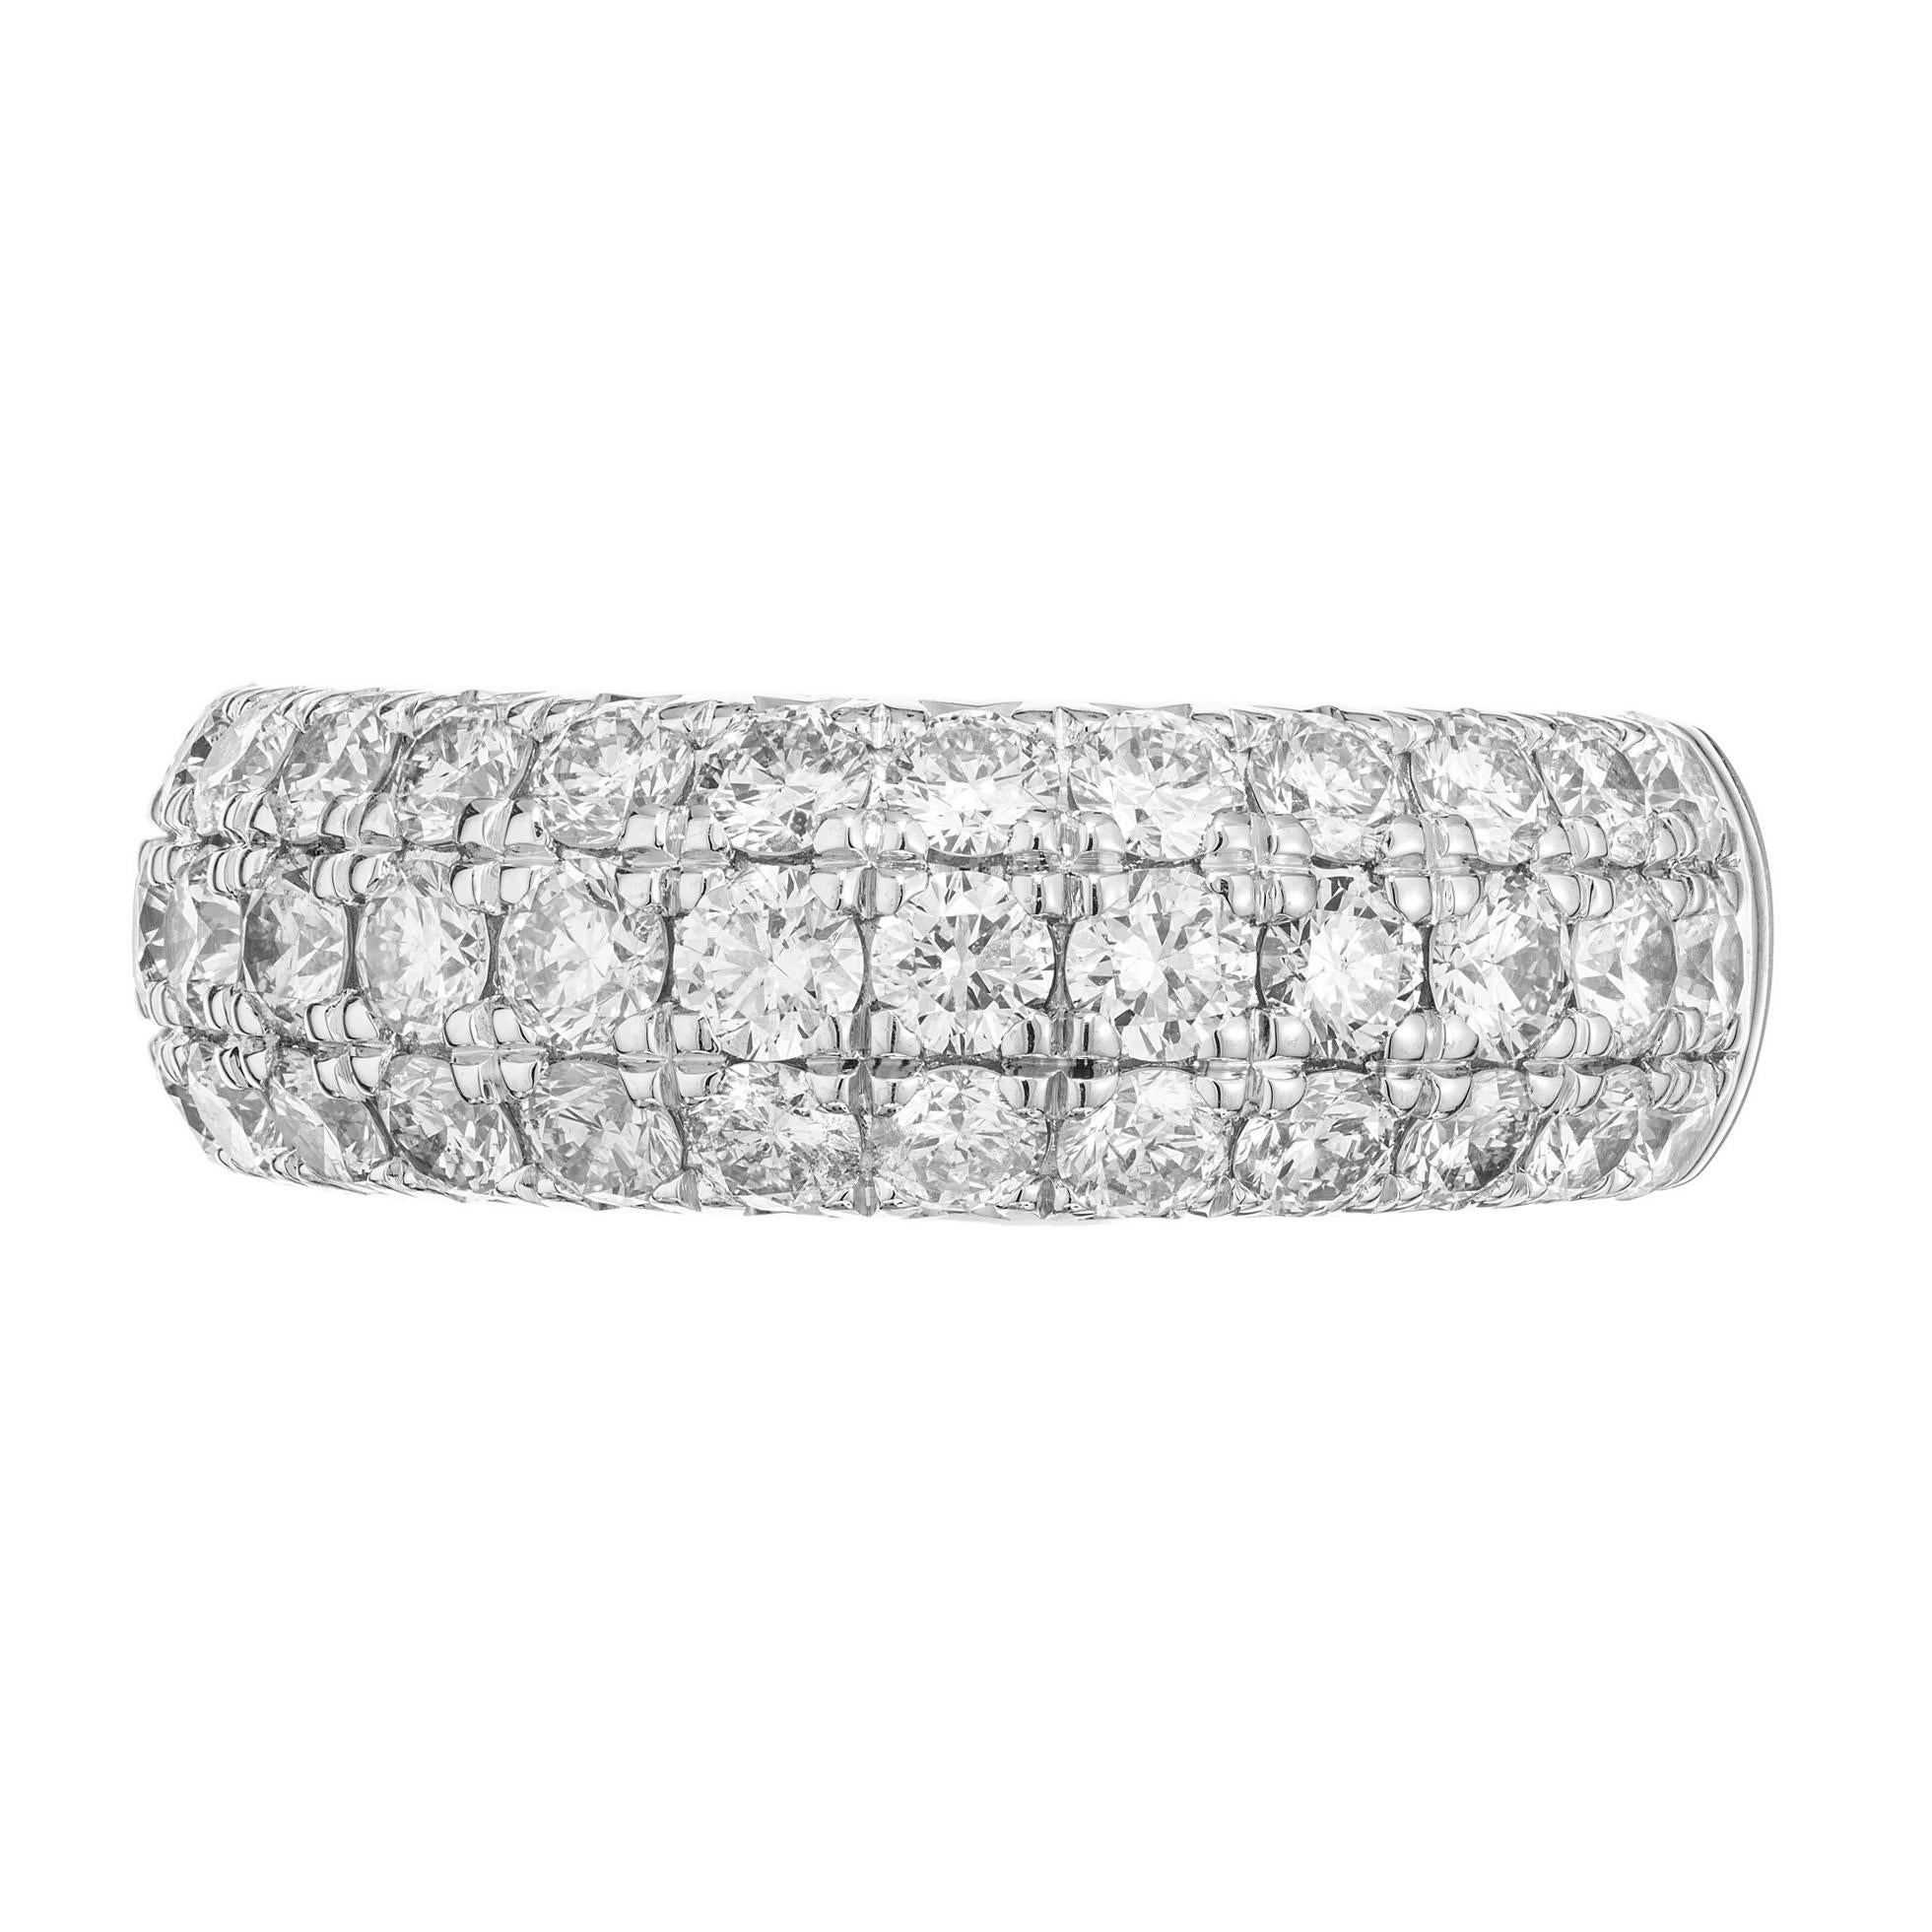 Diamond band ring. This ring boasts of 3 rows of round brilliant cut diamonds in a 14k white gold setting. 39 diamonds with an approximate total of 2.00 carats. The diamonds are bright with great brilliance that go half way across the ring. Designed